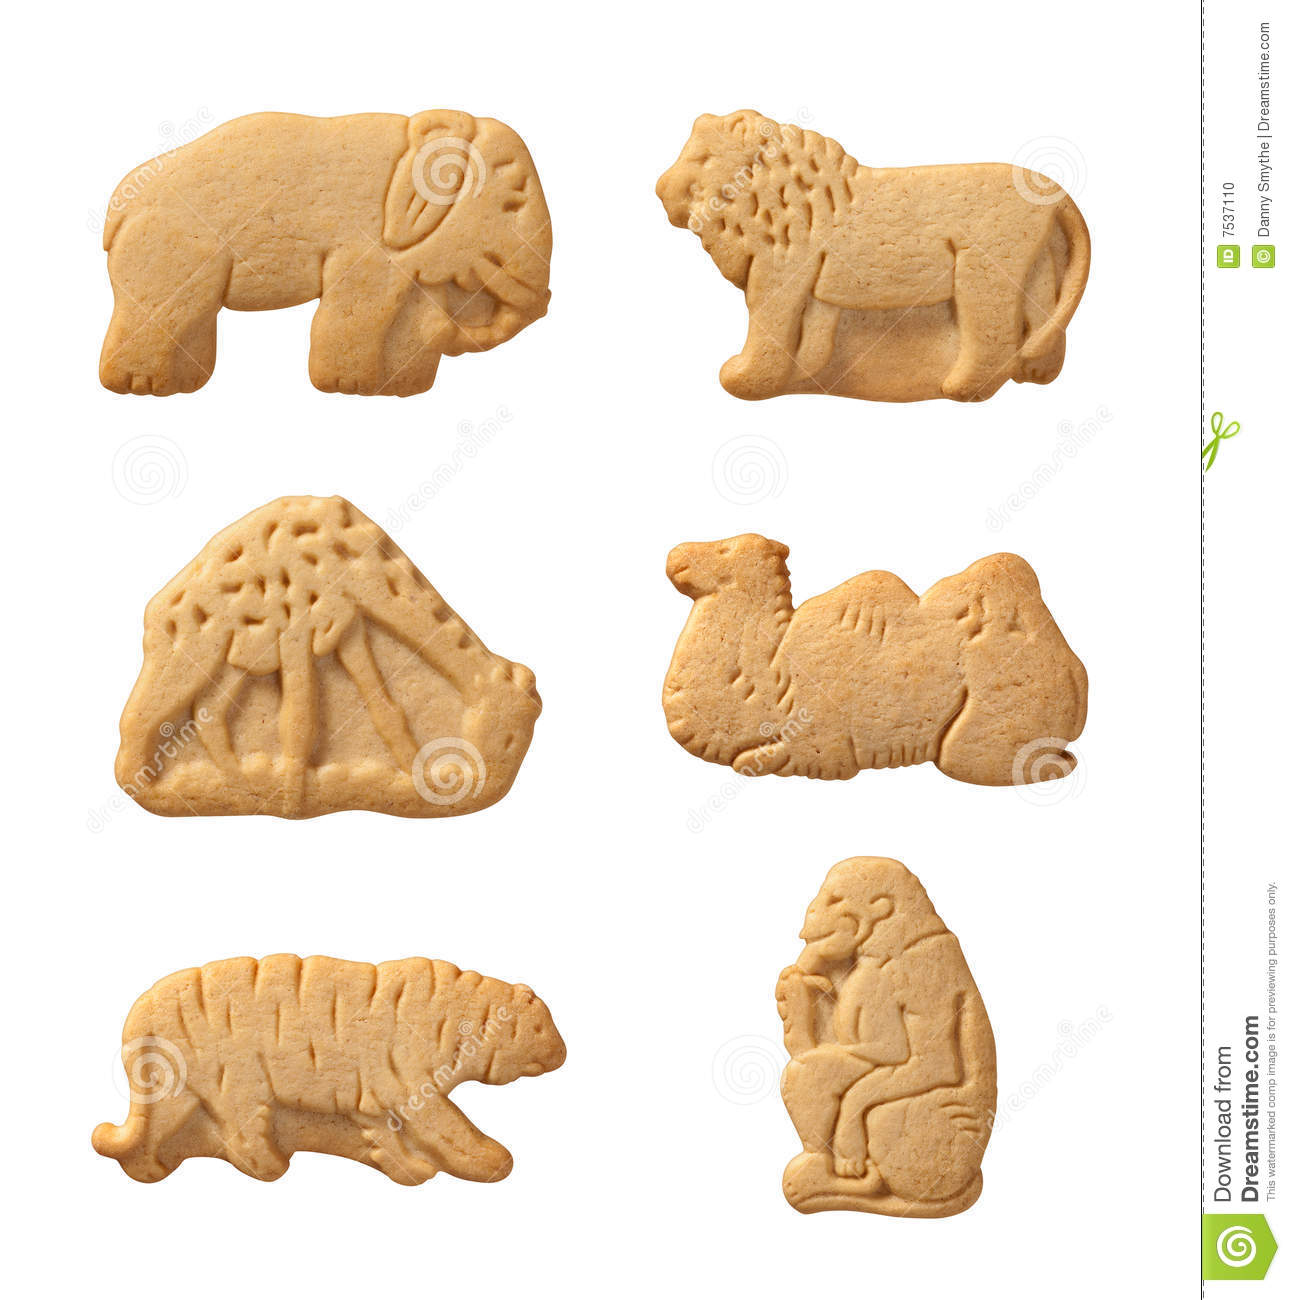 Animal Crackers Isolated On A White Background With A Clipping Path